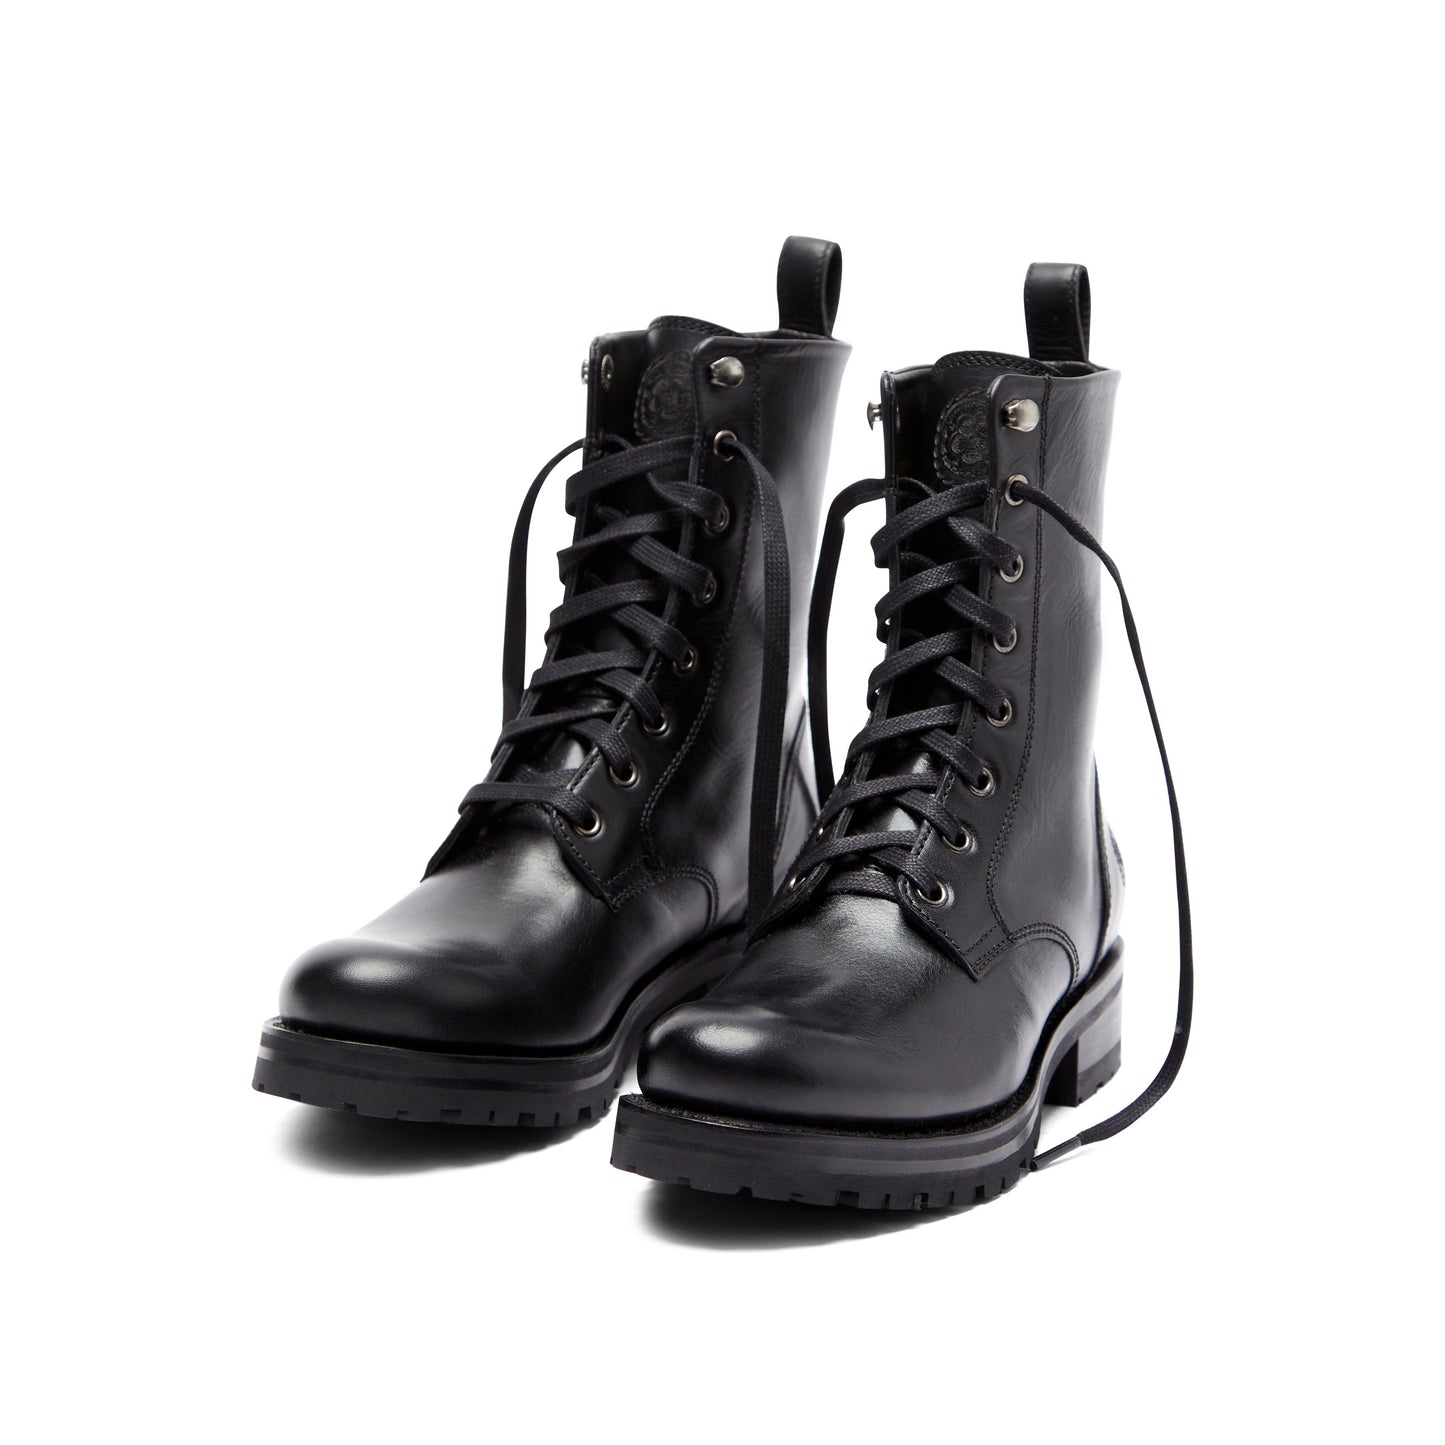 Ranch Road Boots - Poppy Combat - Black - Front Pair Unlaced